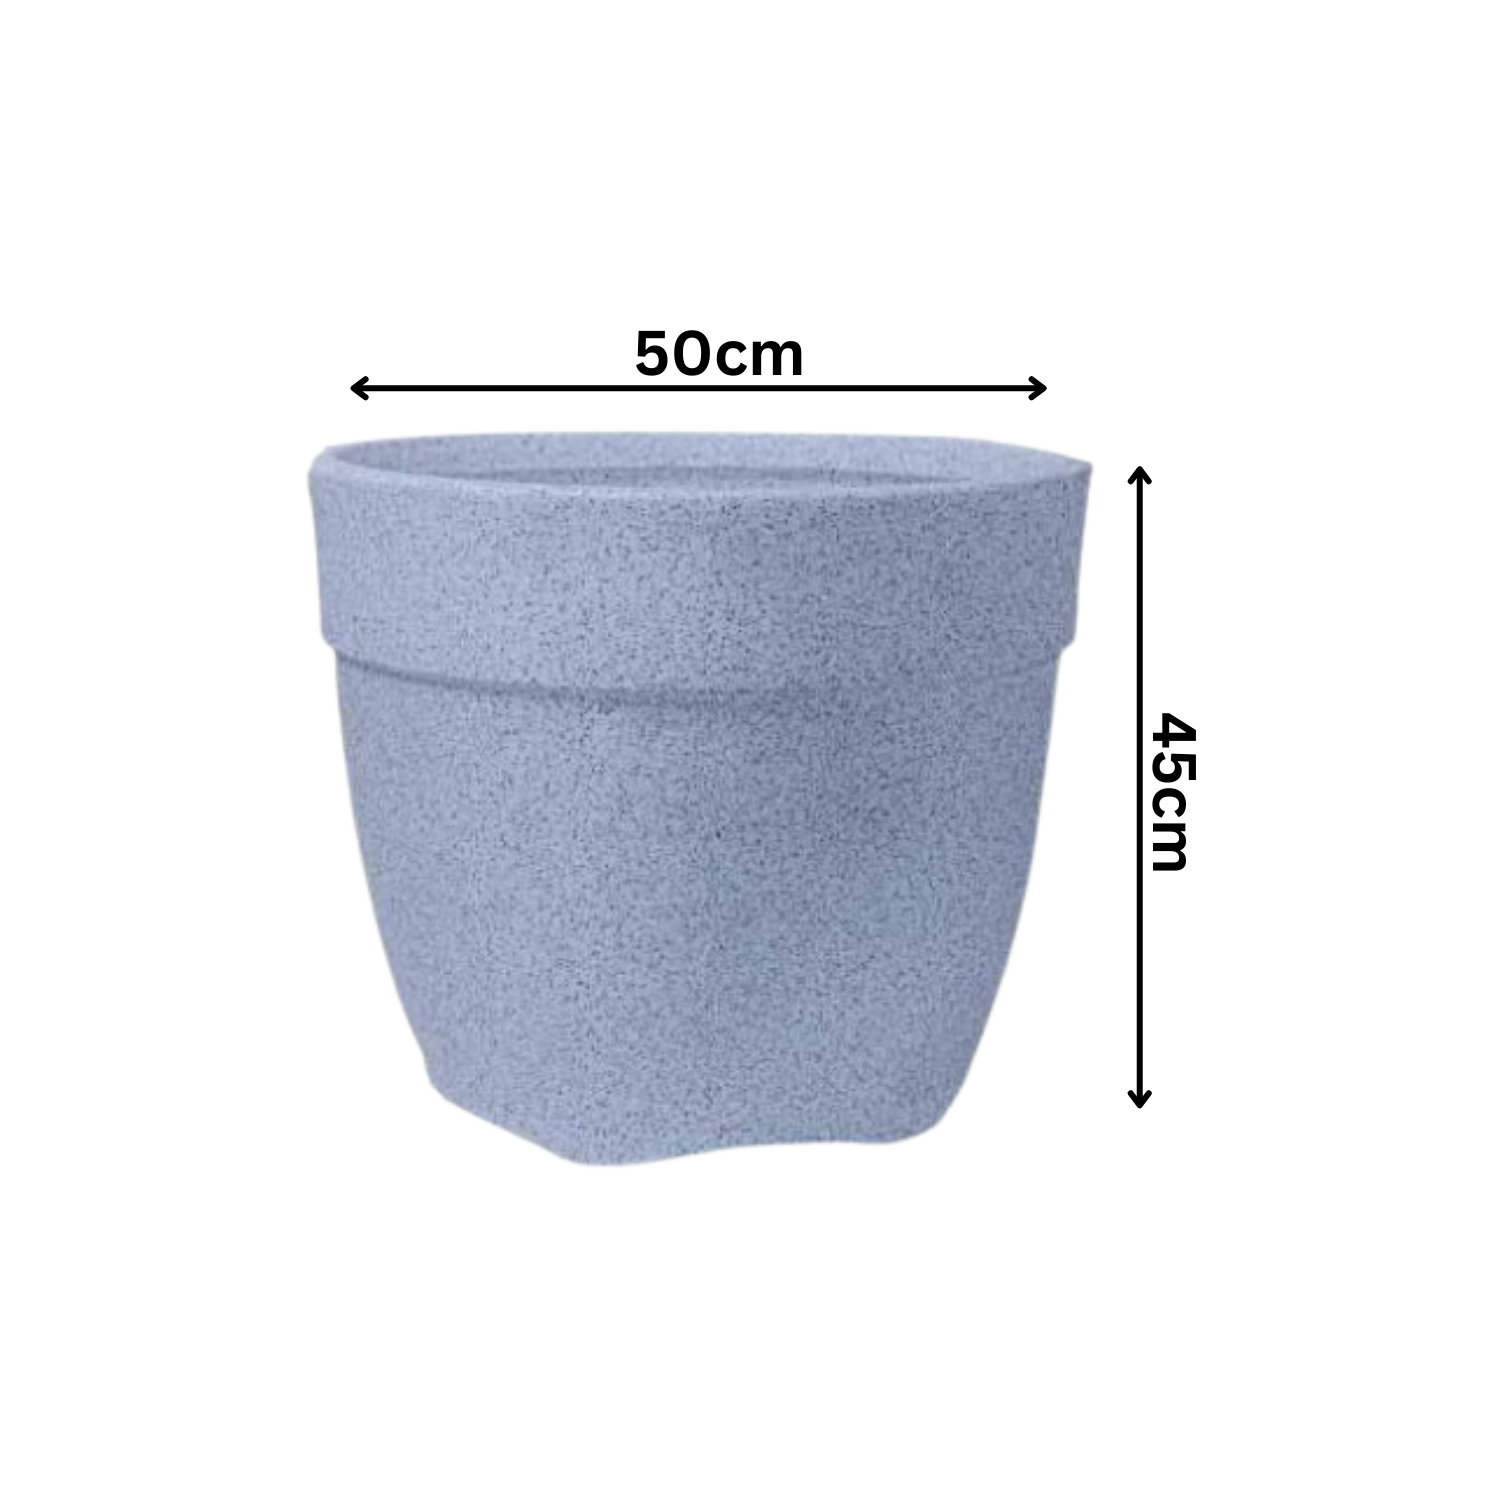 Hug A Plant | Barca Round Rotomolded Plastic Pot for Home & Garden (White Stone Finish, Pack of 1)